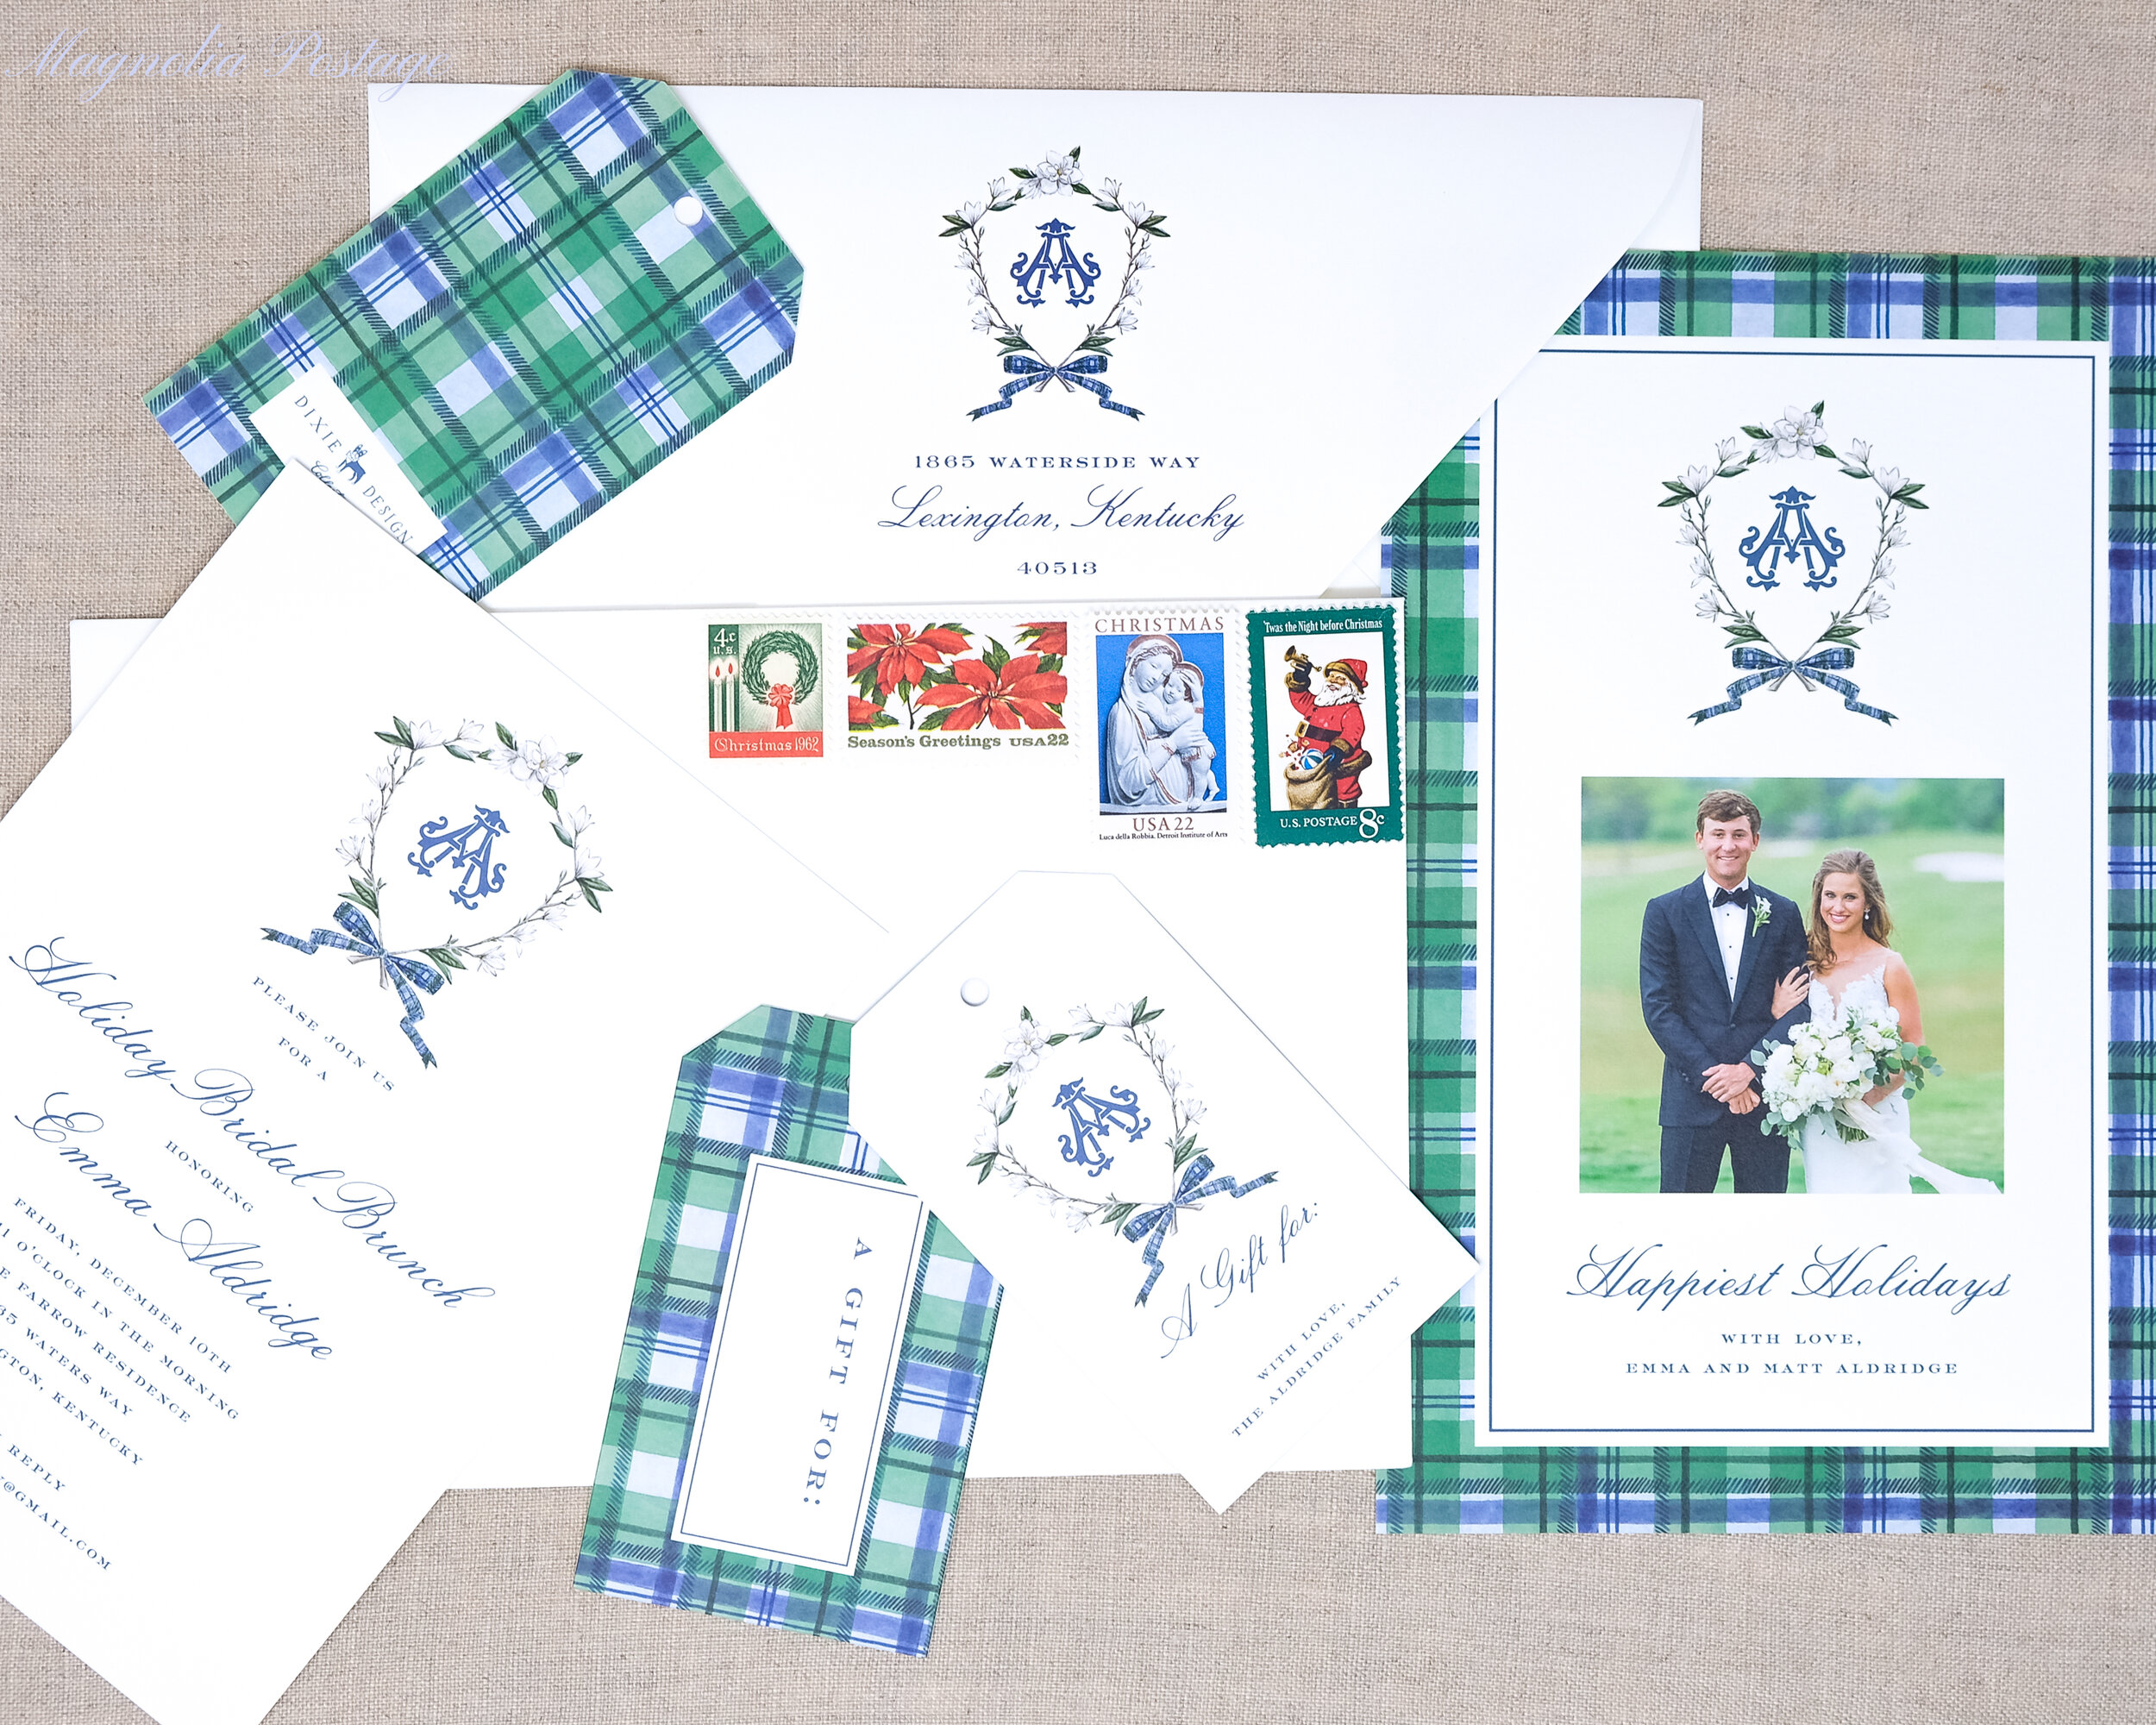 Where to Buy Stamps for Wedding Invitations